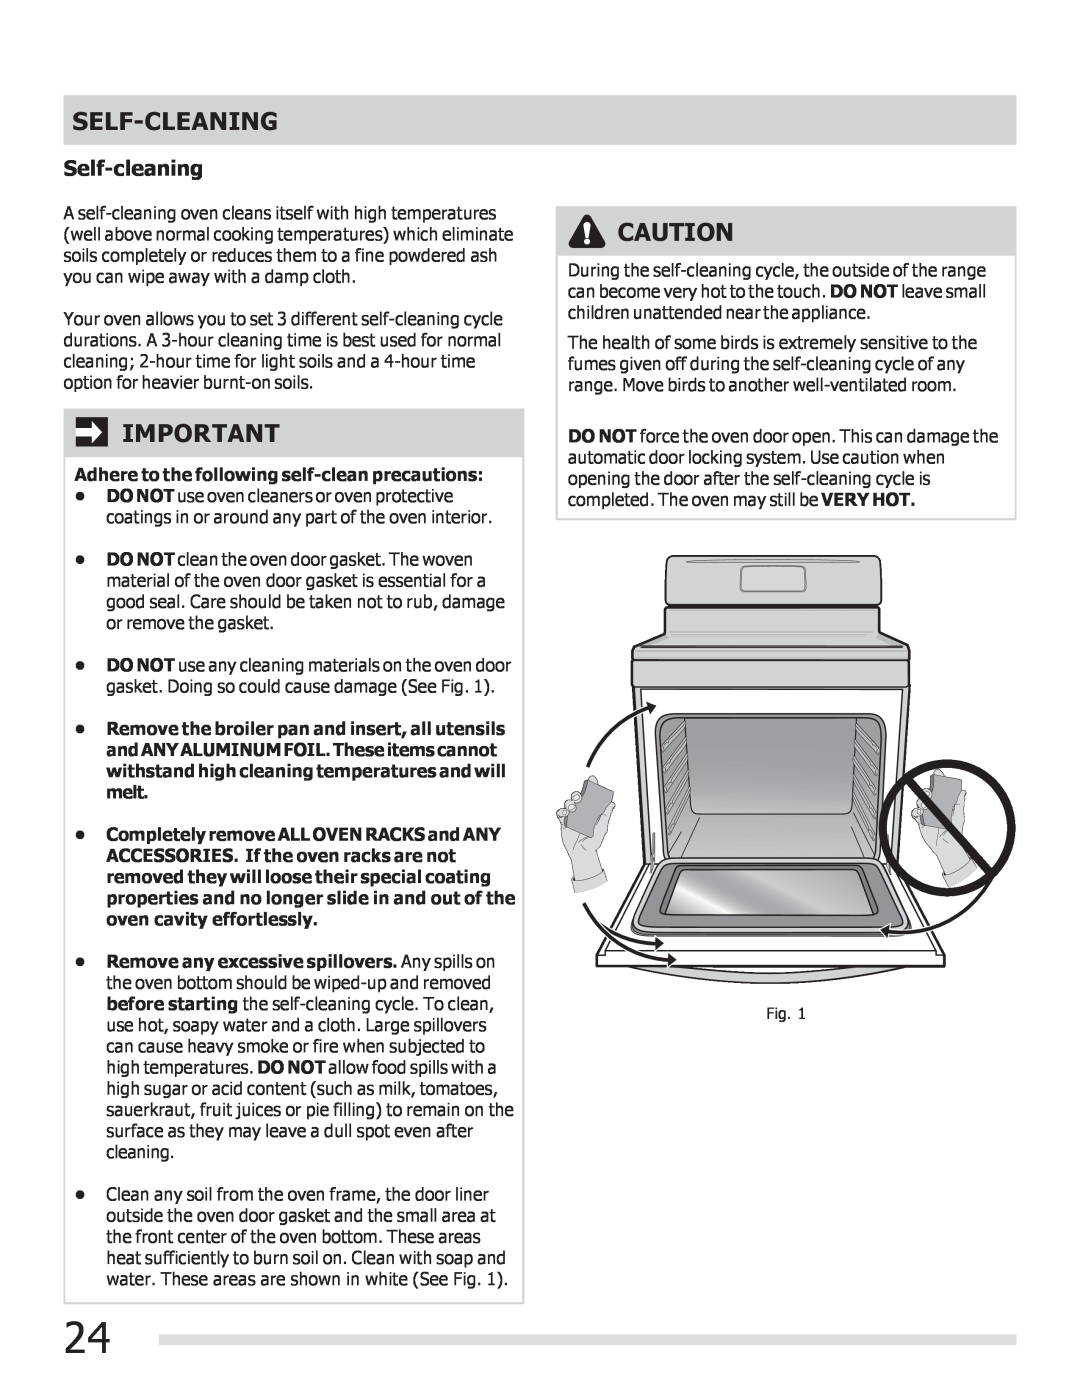 Frigidaire 316901300, CGGF3054KF important safety instructions Self-Cleaning, Self-cleaning 